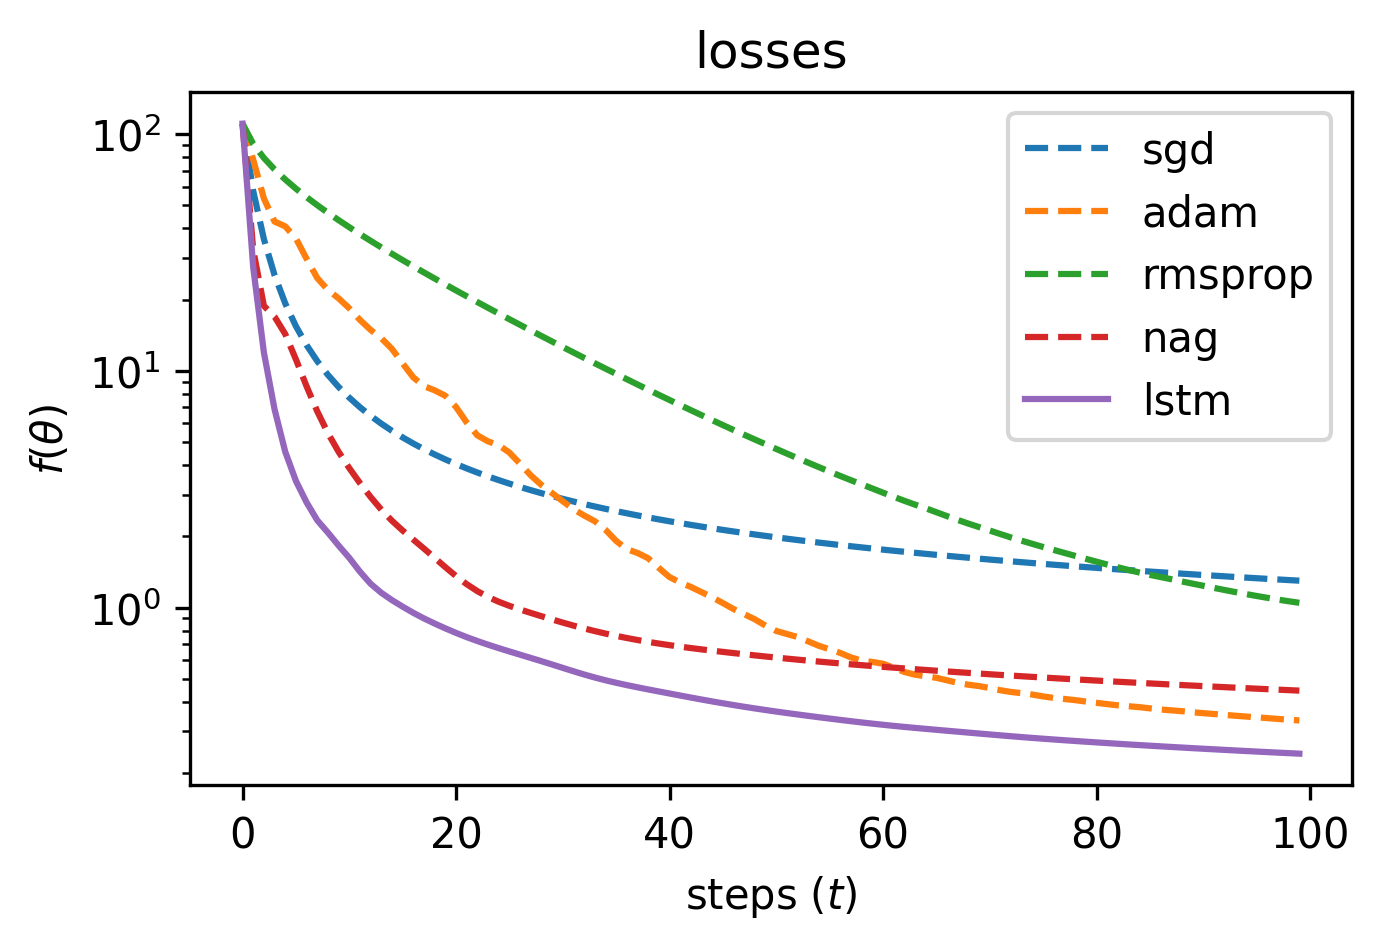 lstm loss plot with other optimizers